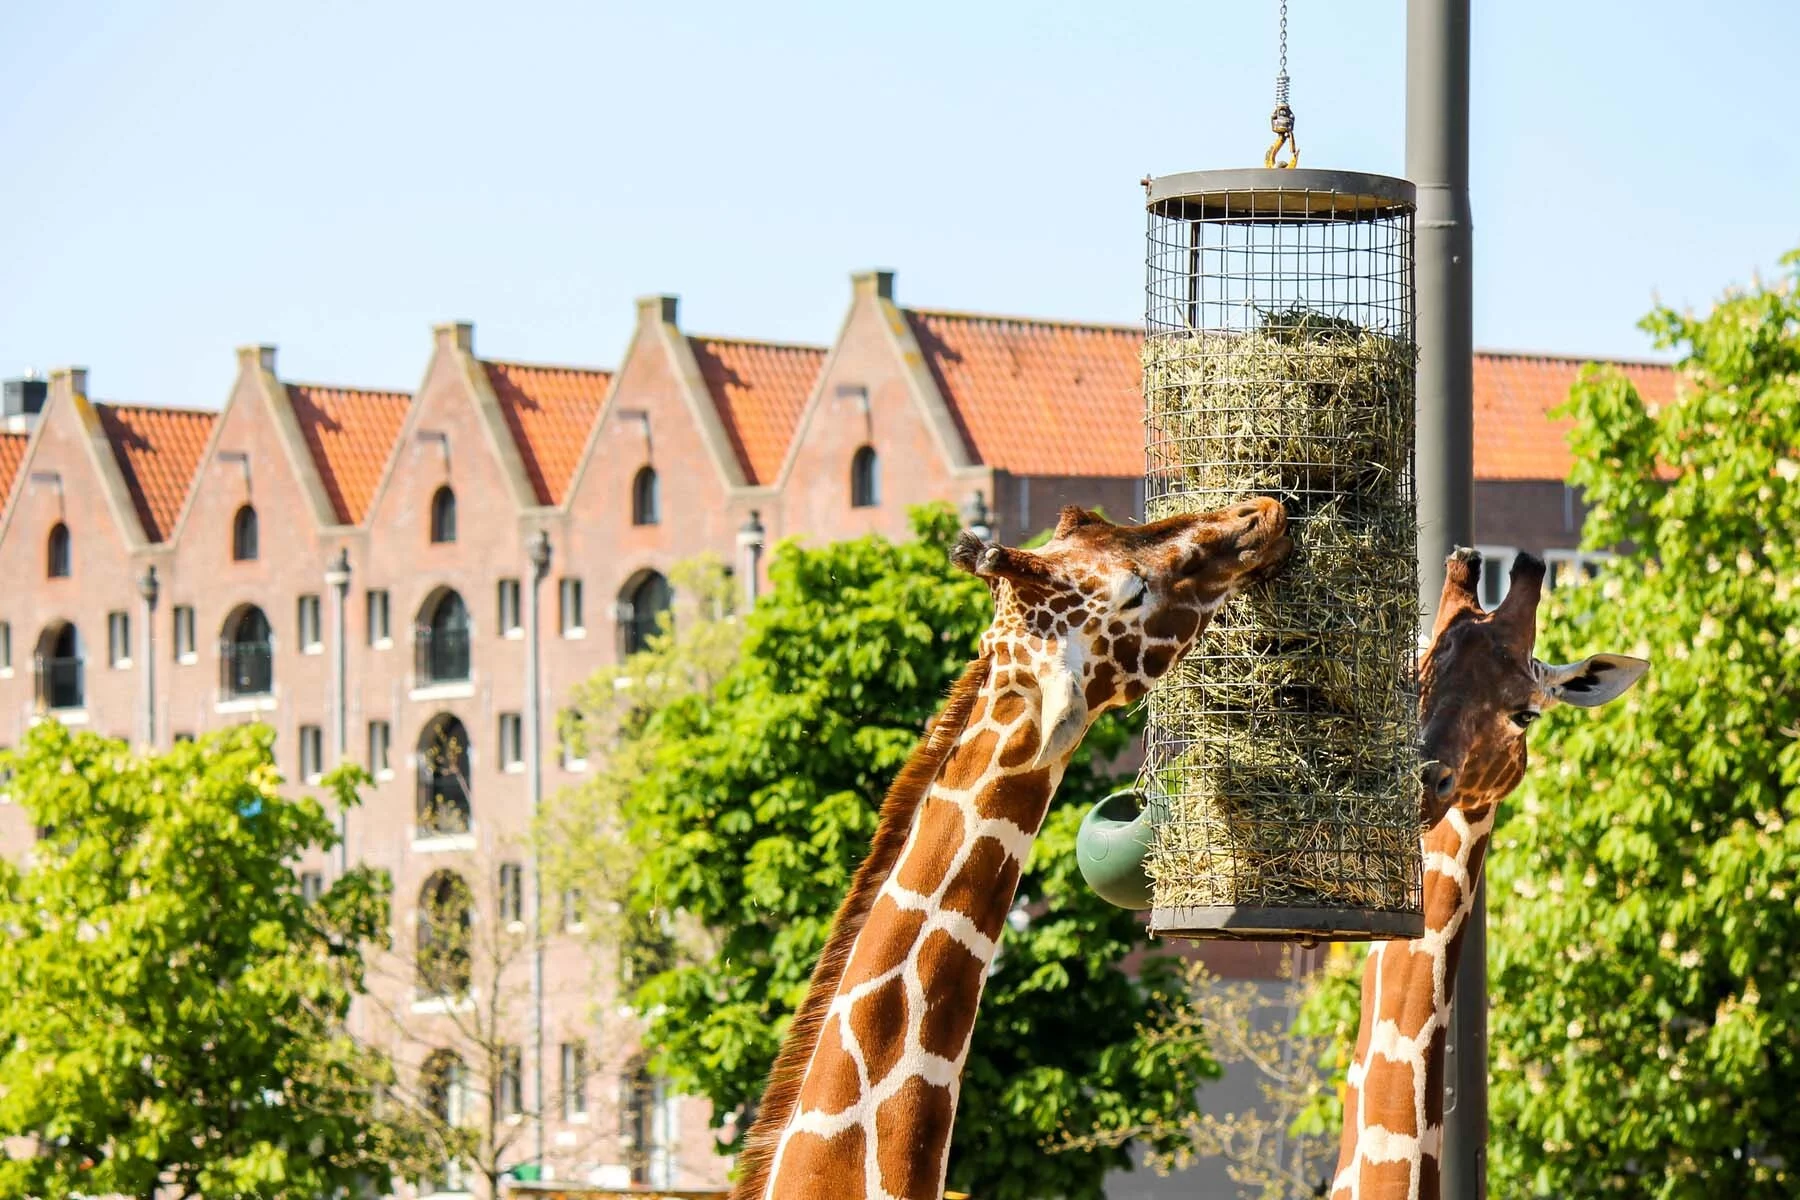 A giraffe at the Artis Zoo in the Plantage neighborhood of Amsterdam